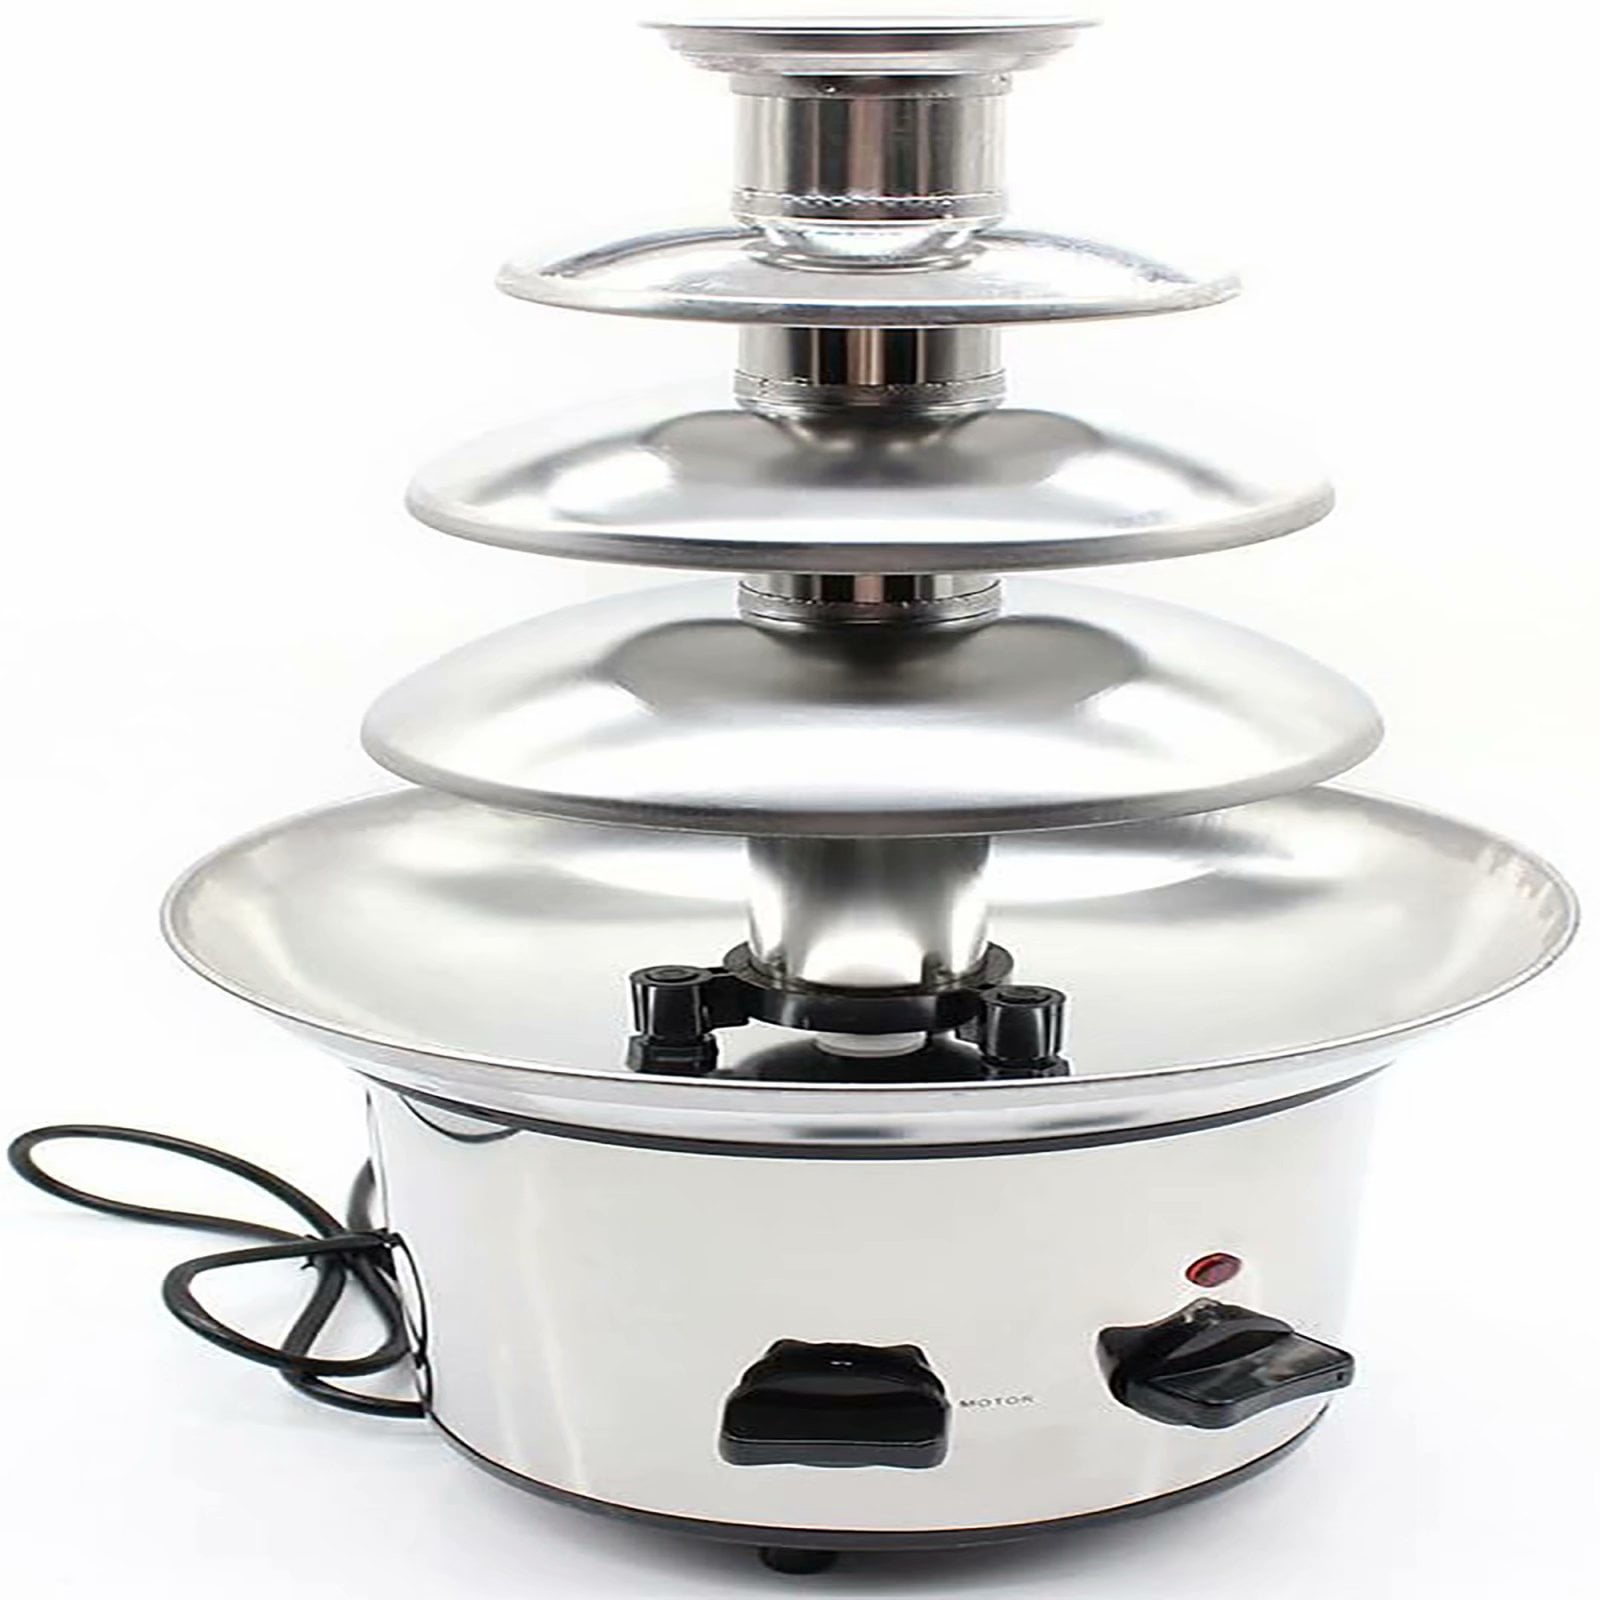 Details about   Luxury Chocolate Fondue Fountain 4 Tiers Commercial Stainless Steel Hot Waterfal 